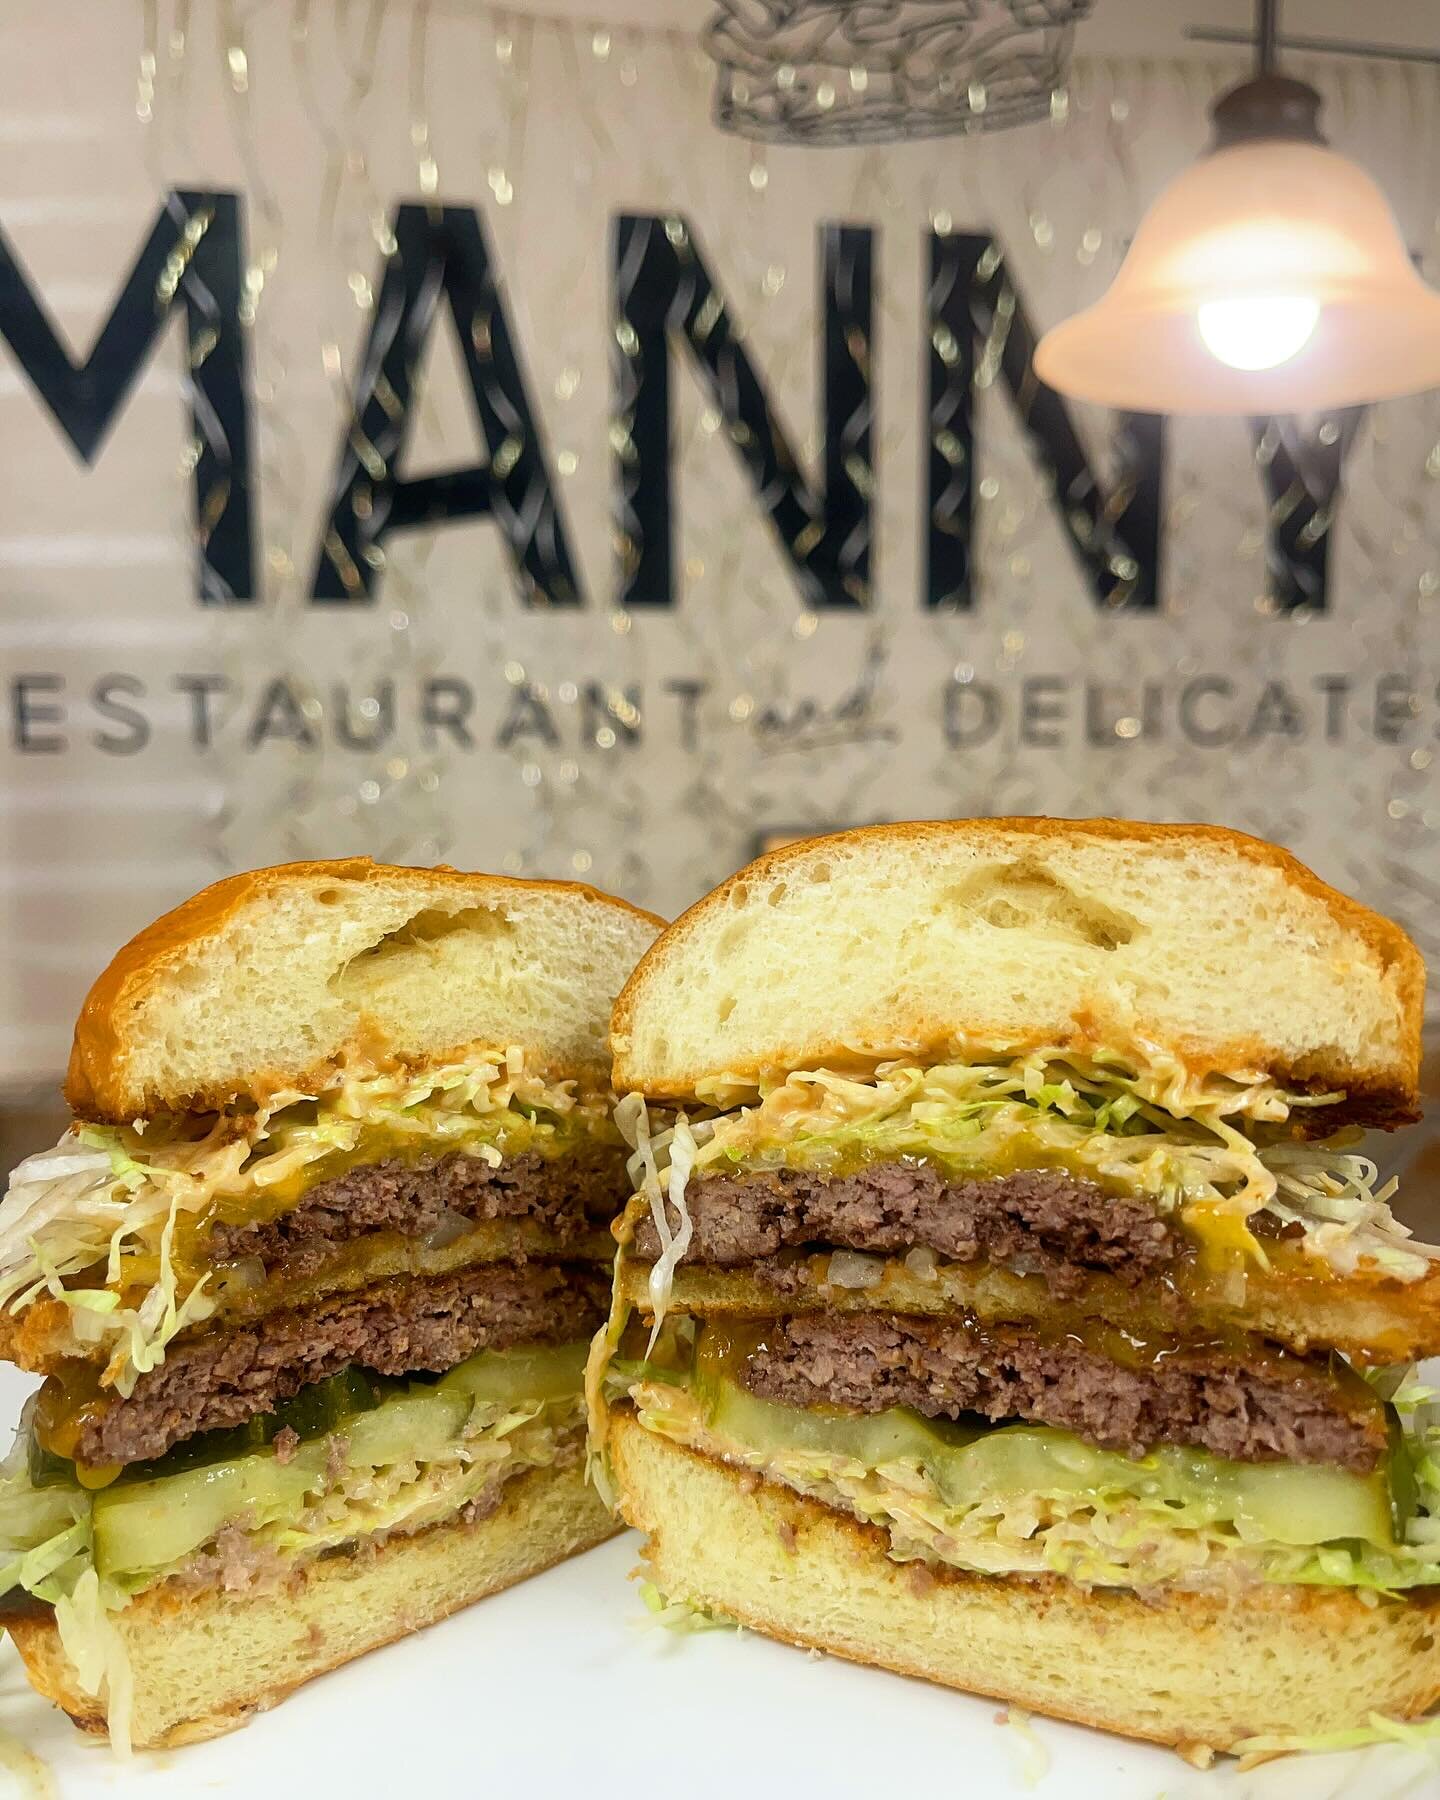 They don&rsquo;t call it the Big Mac for nothin&rsquo;. Come try fitting your mouth around our Manny&rsquo;s Big Mac. You won&rsquo;t regret it. This weekend only. #NoOtherDeli